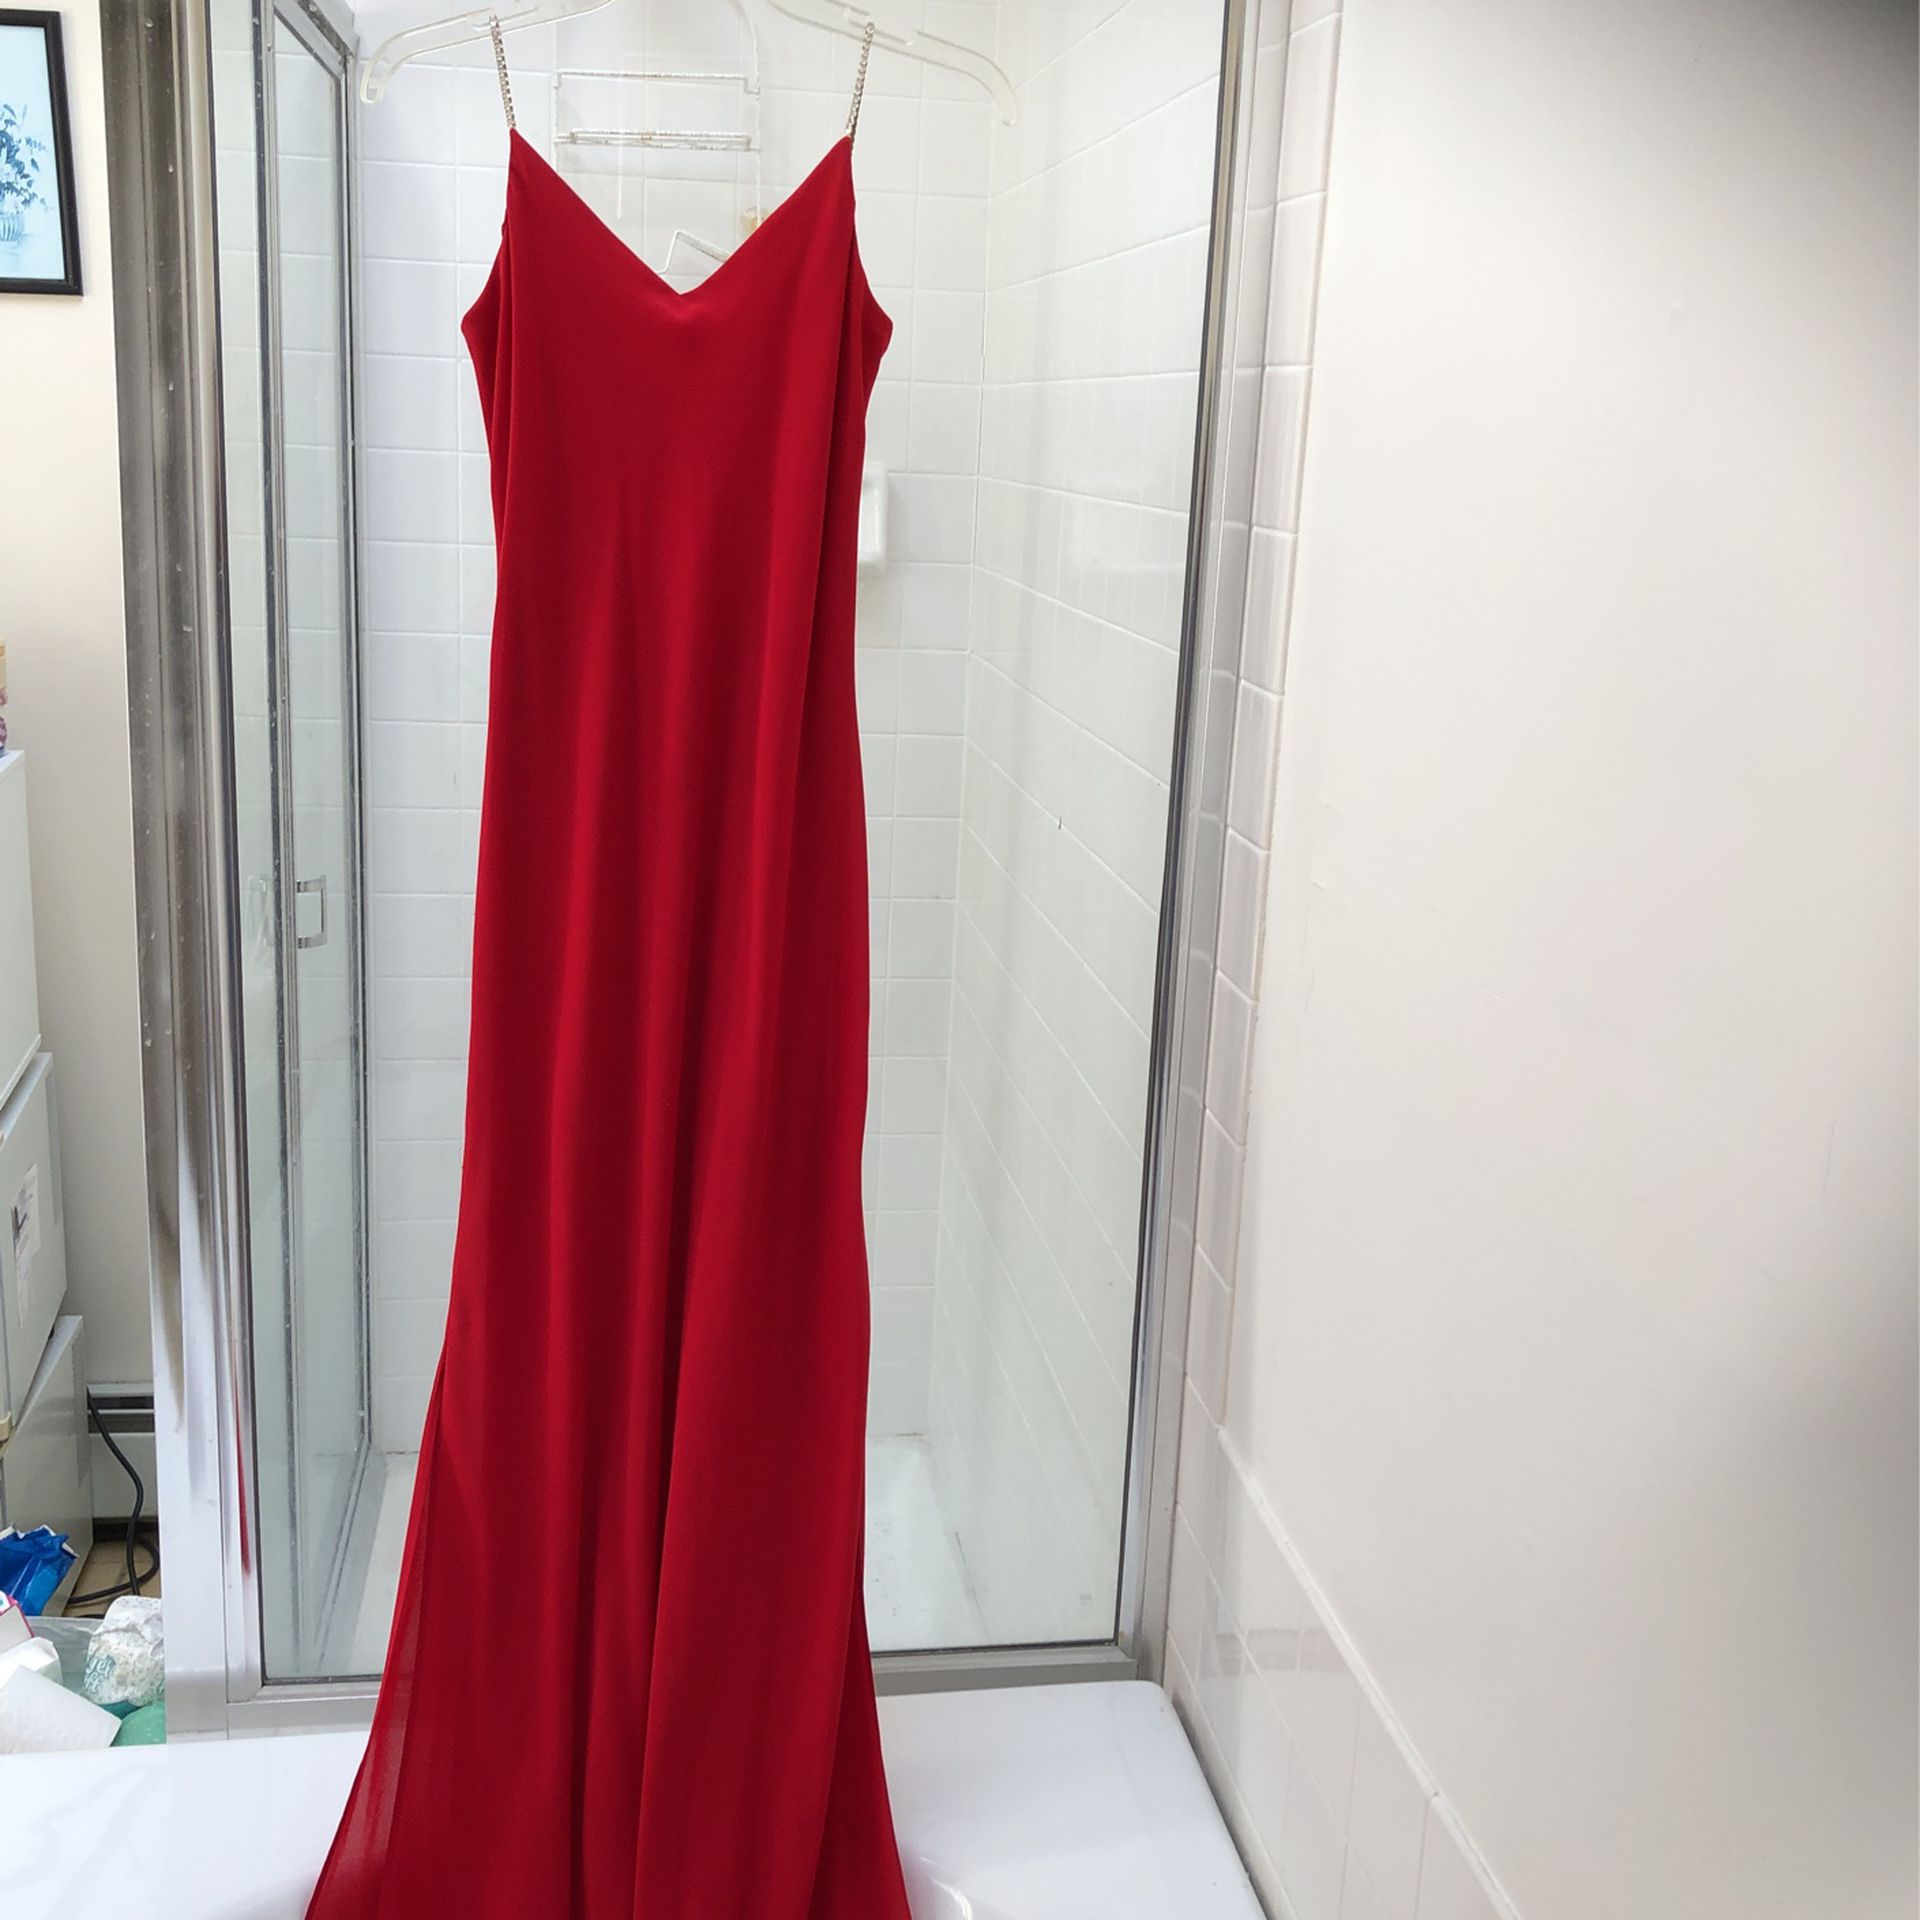 Simple Yet Elegant Red Dress With Beaded Straps, Low Cut Back And Two Dramatic Side Slits